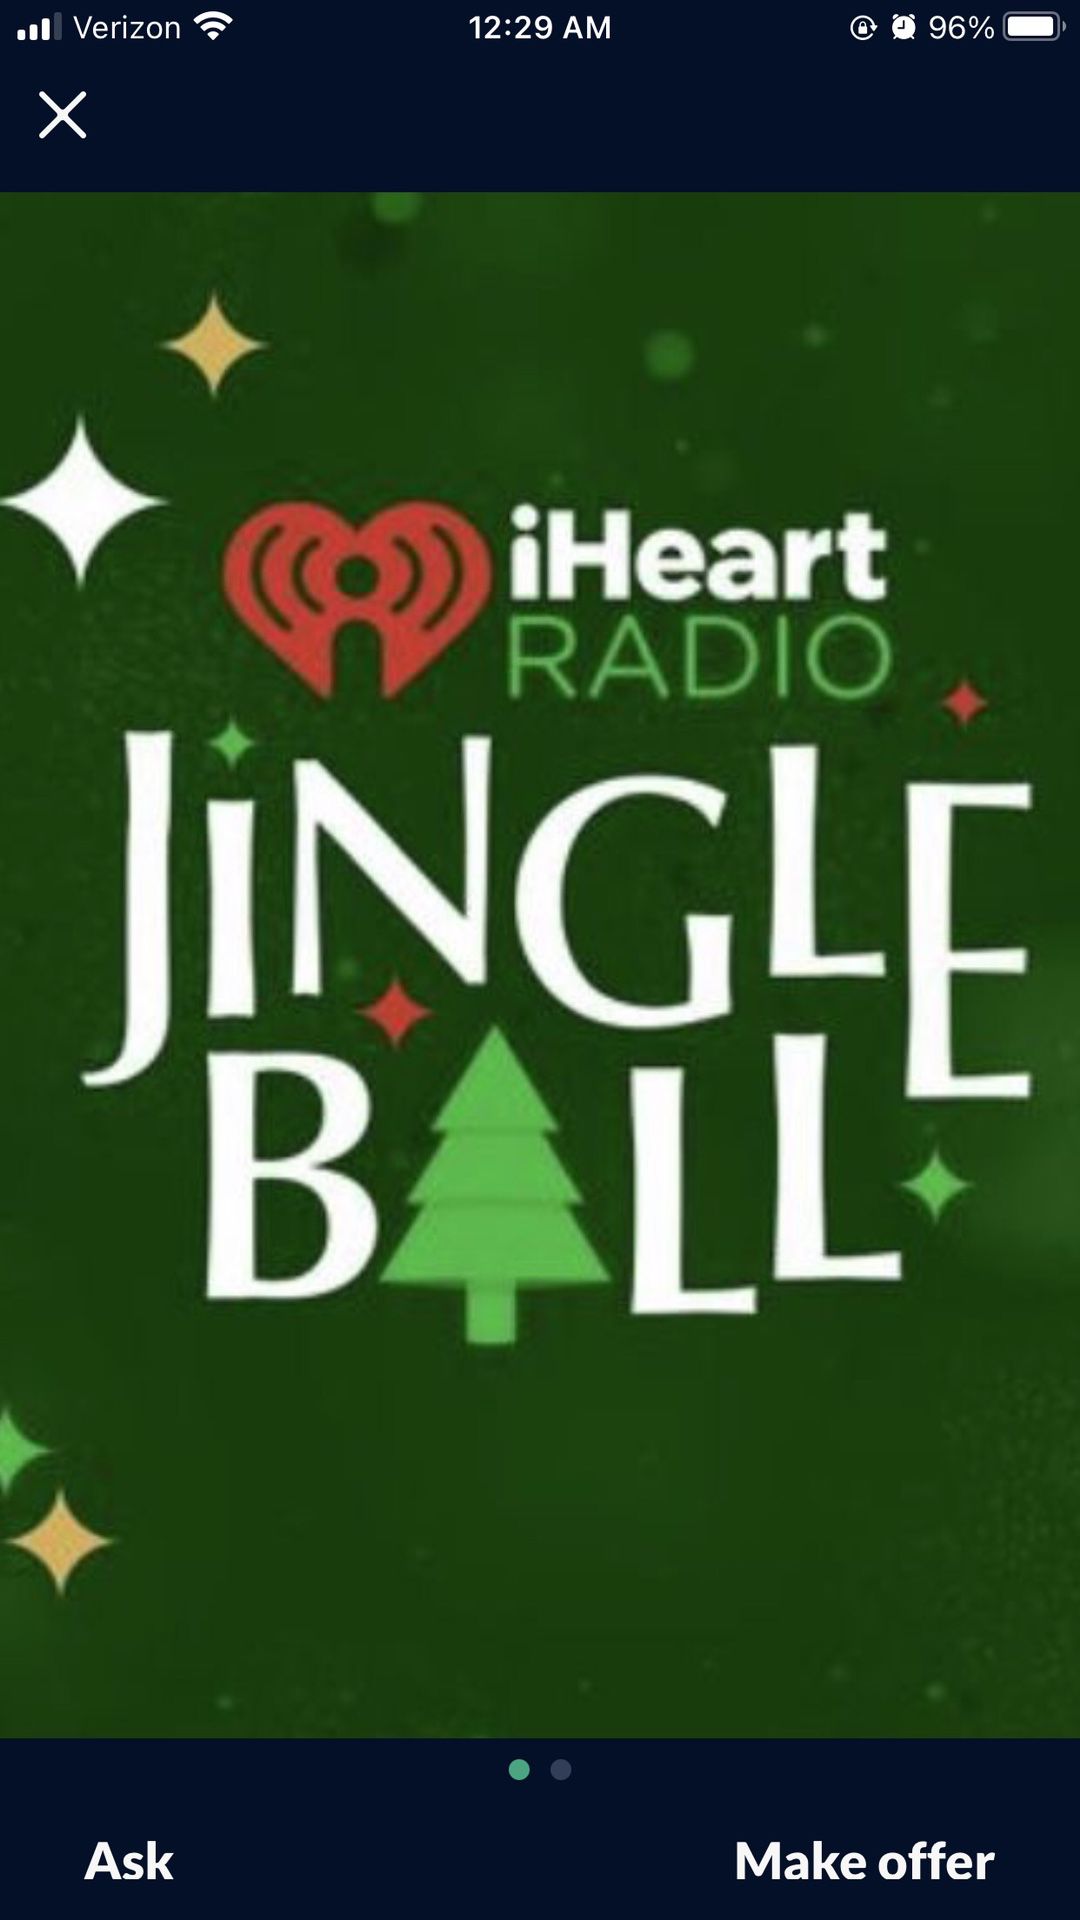 102.7 KISS FM JINGLE BALL UP FRONT 🔥🔥🎄🍺🍻🥂🍹HOT 🔥🔥FLOOR SEATS 💺 💺 (2) TICKETS 🎫 🎫 $150 EACH $300 FOR PAIR 🔥🔥